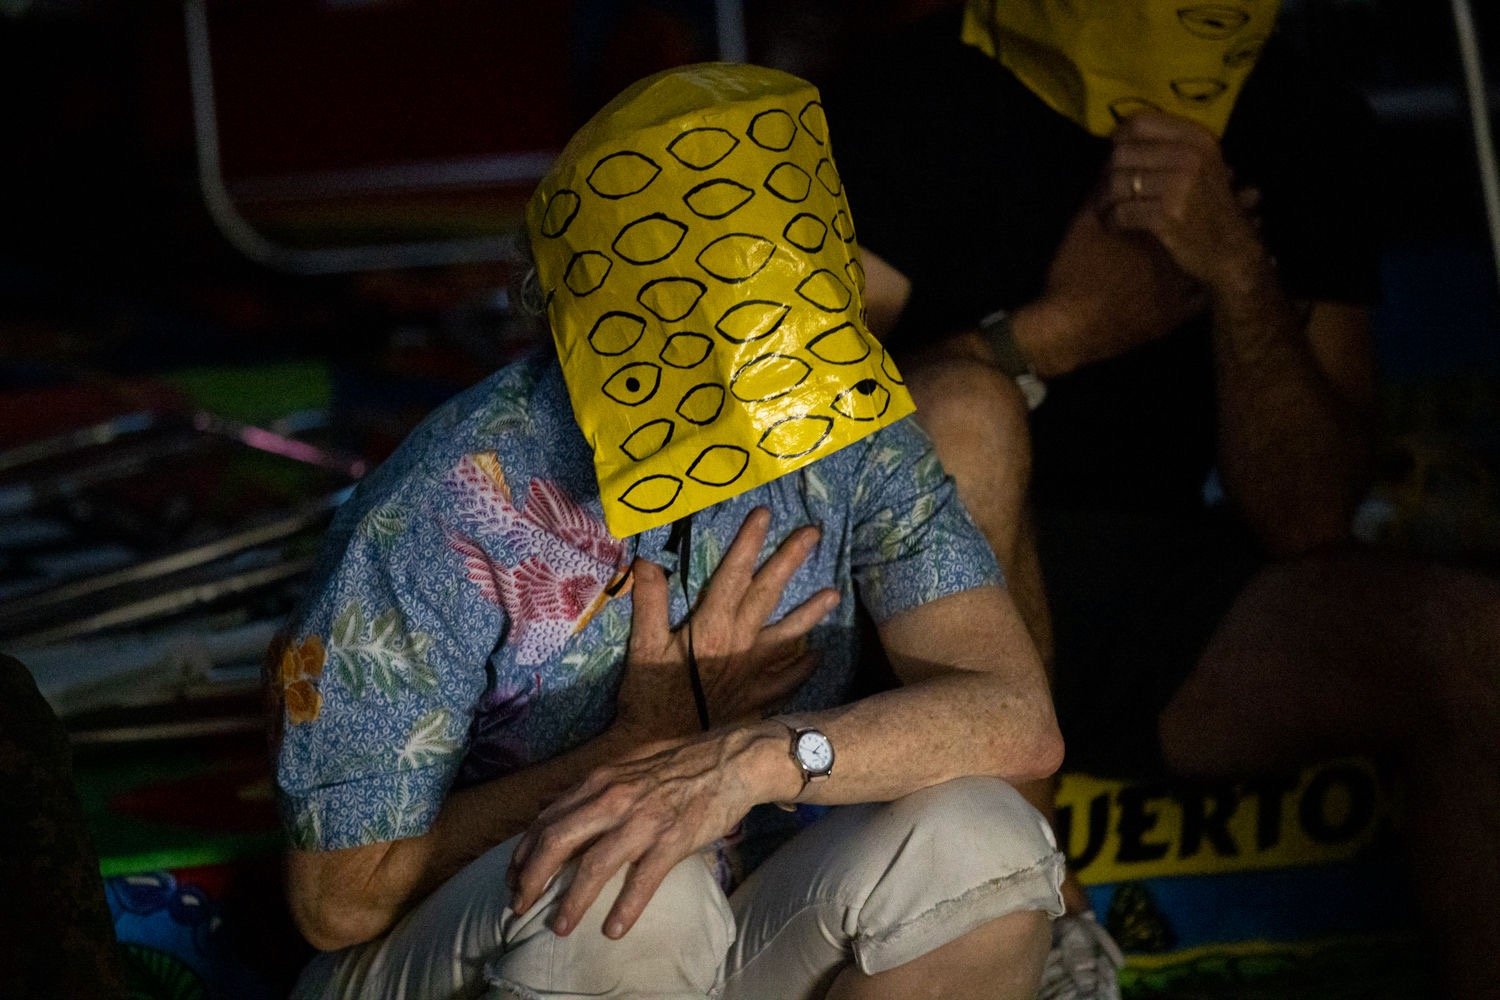 An audience member wearing a yellow papier-mache mask with multiple eyes drawn on it, places their palm on their chest. Photo by Maria Baranova.